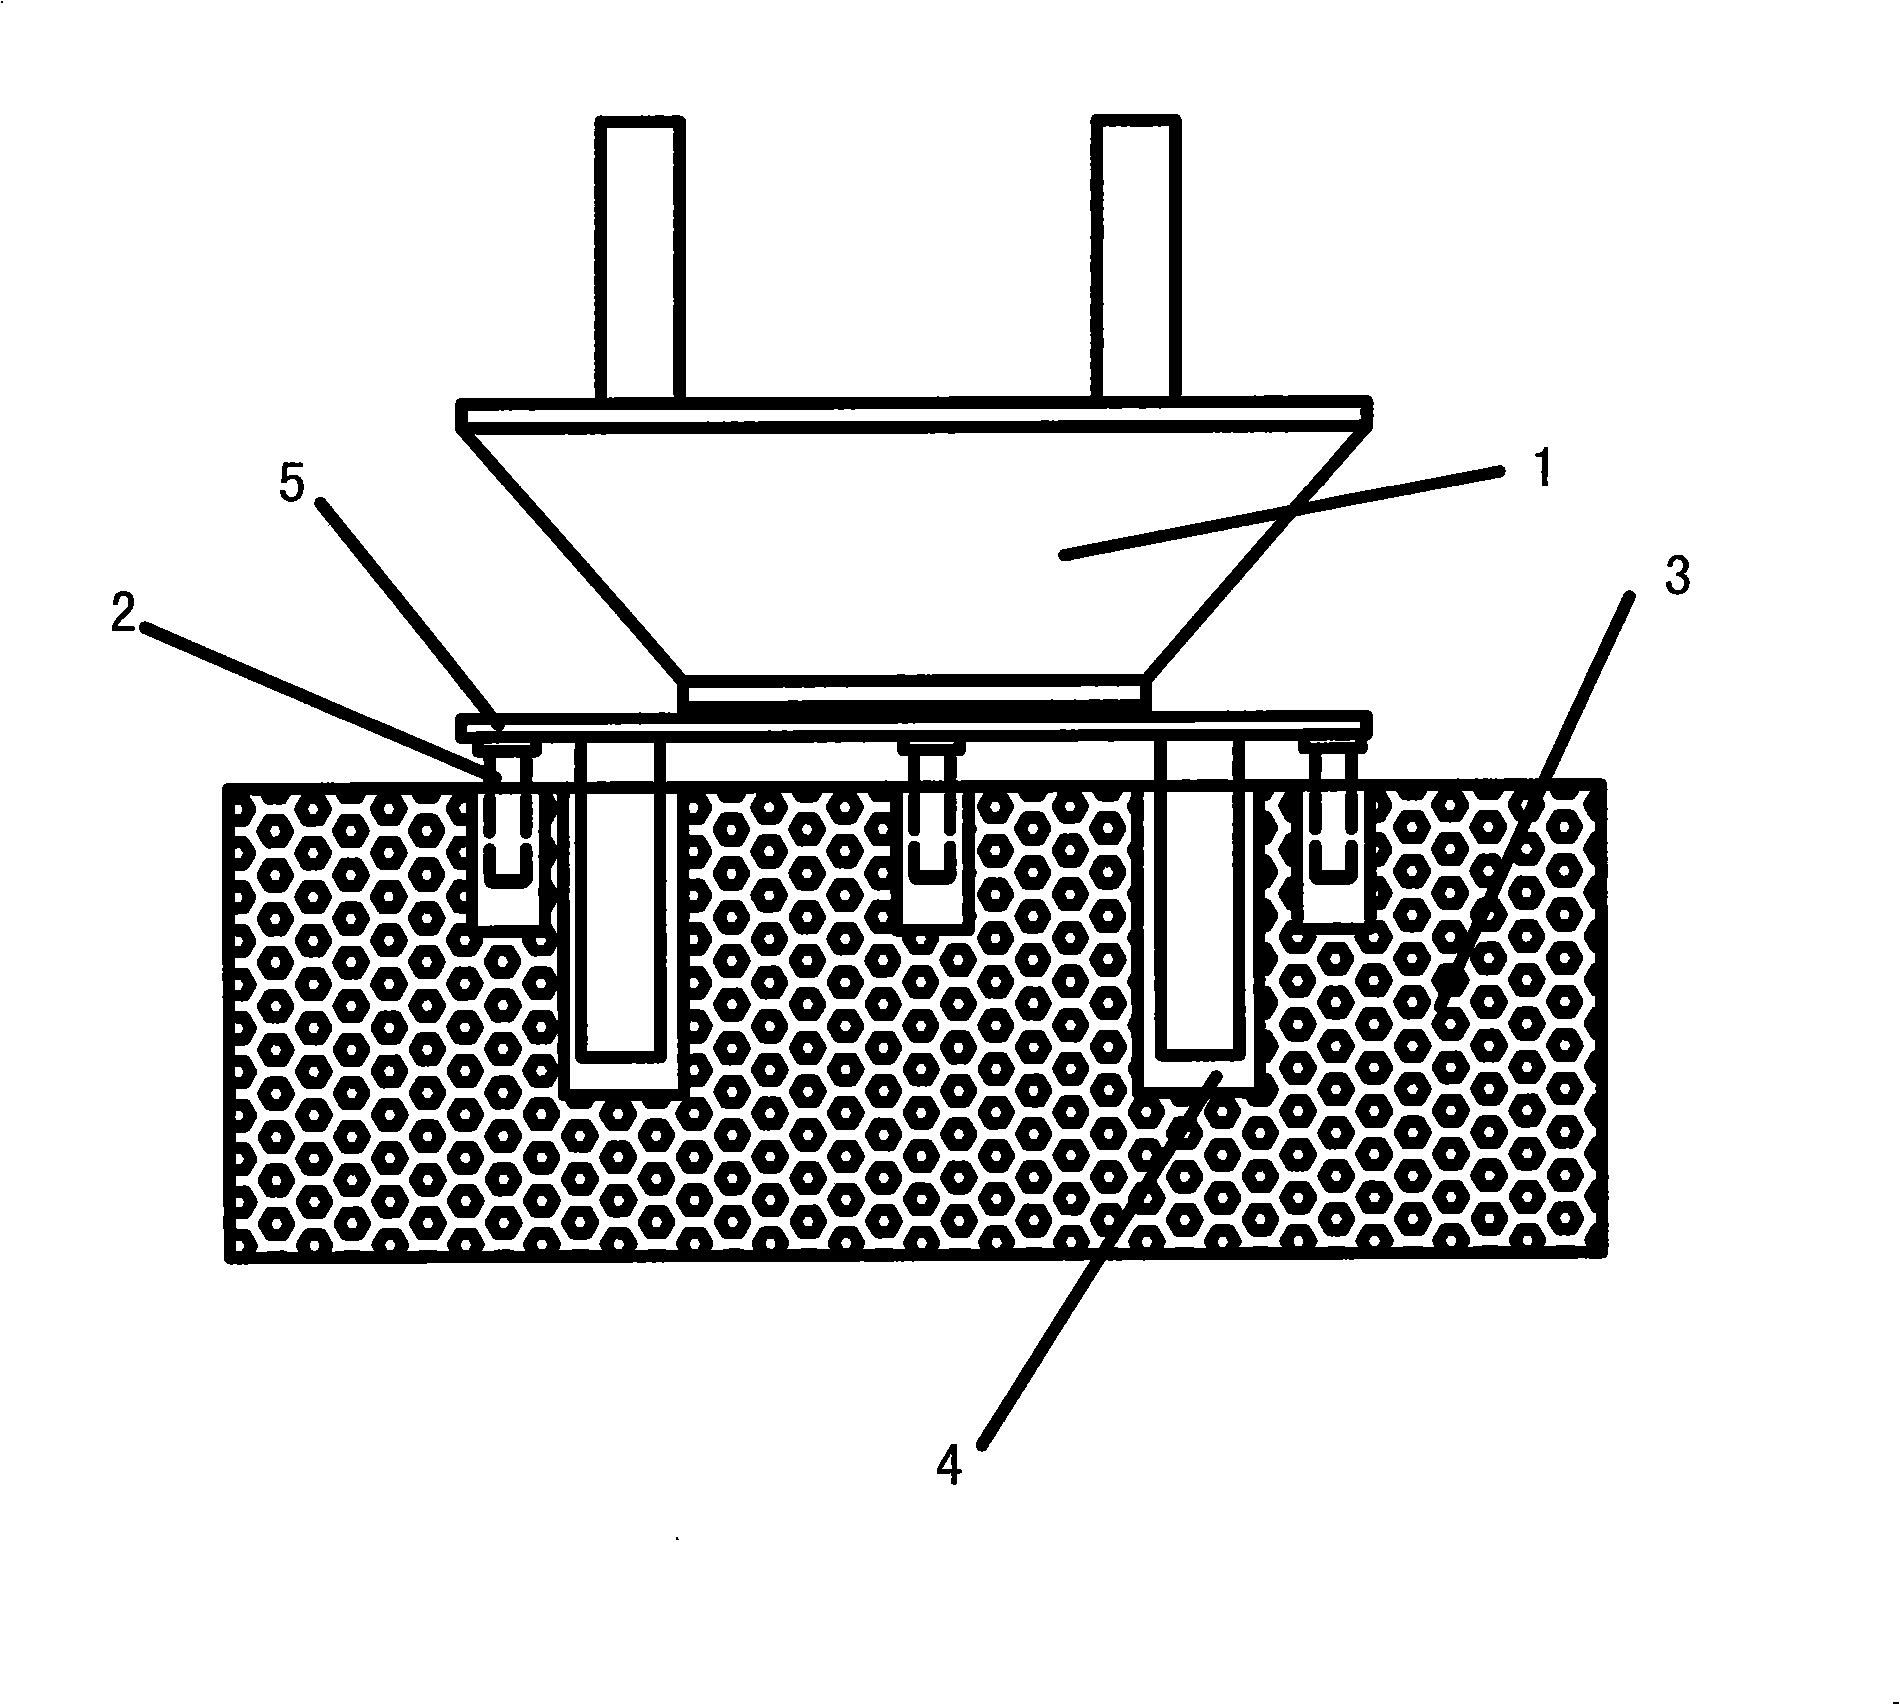 One-time leveling method for installation of large bridge support